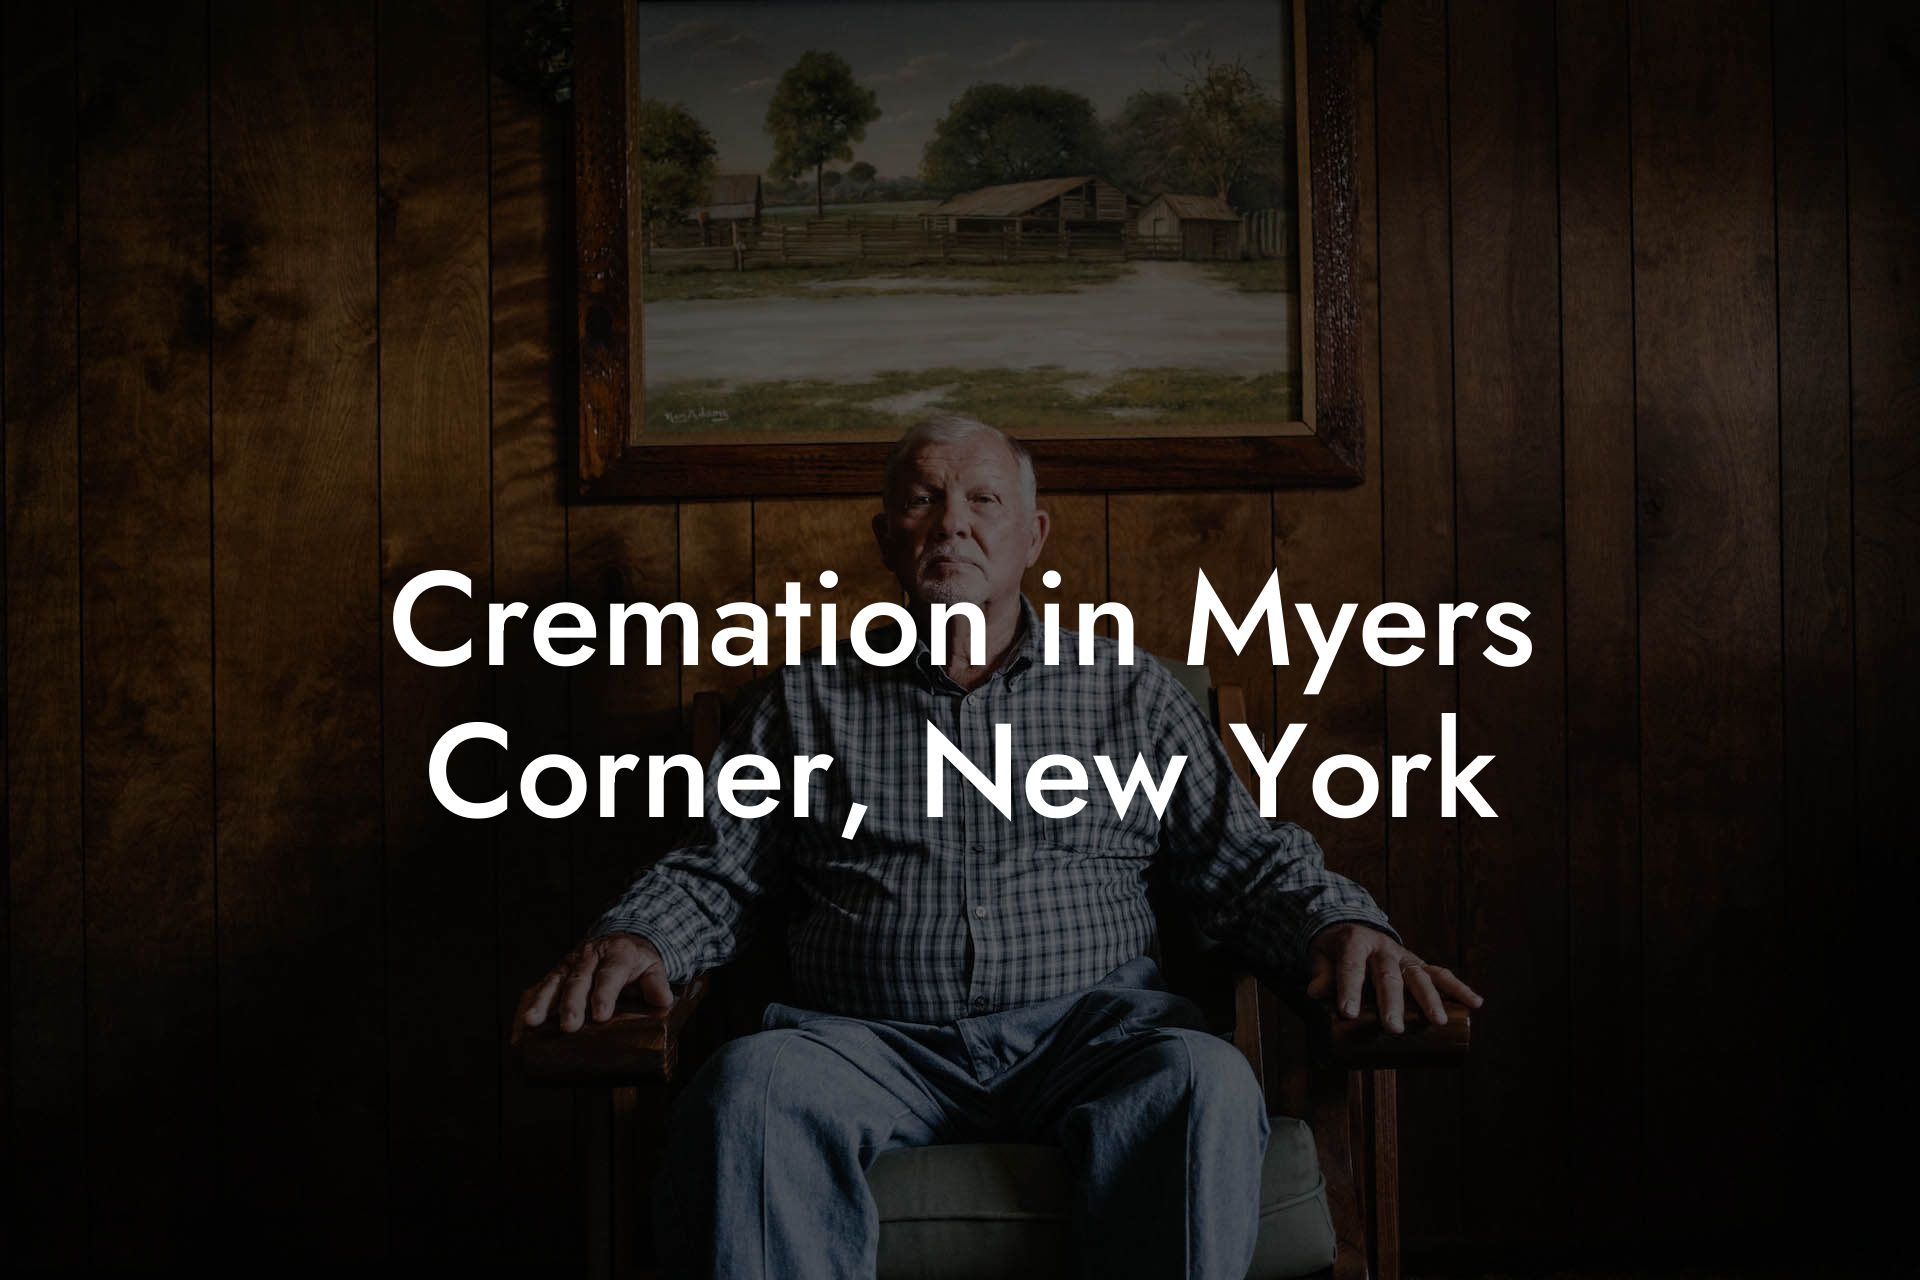 Cremation in Myers Corner, New York